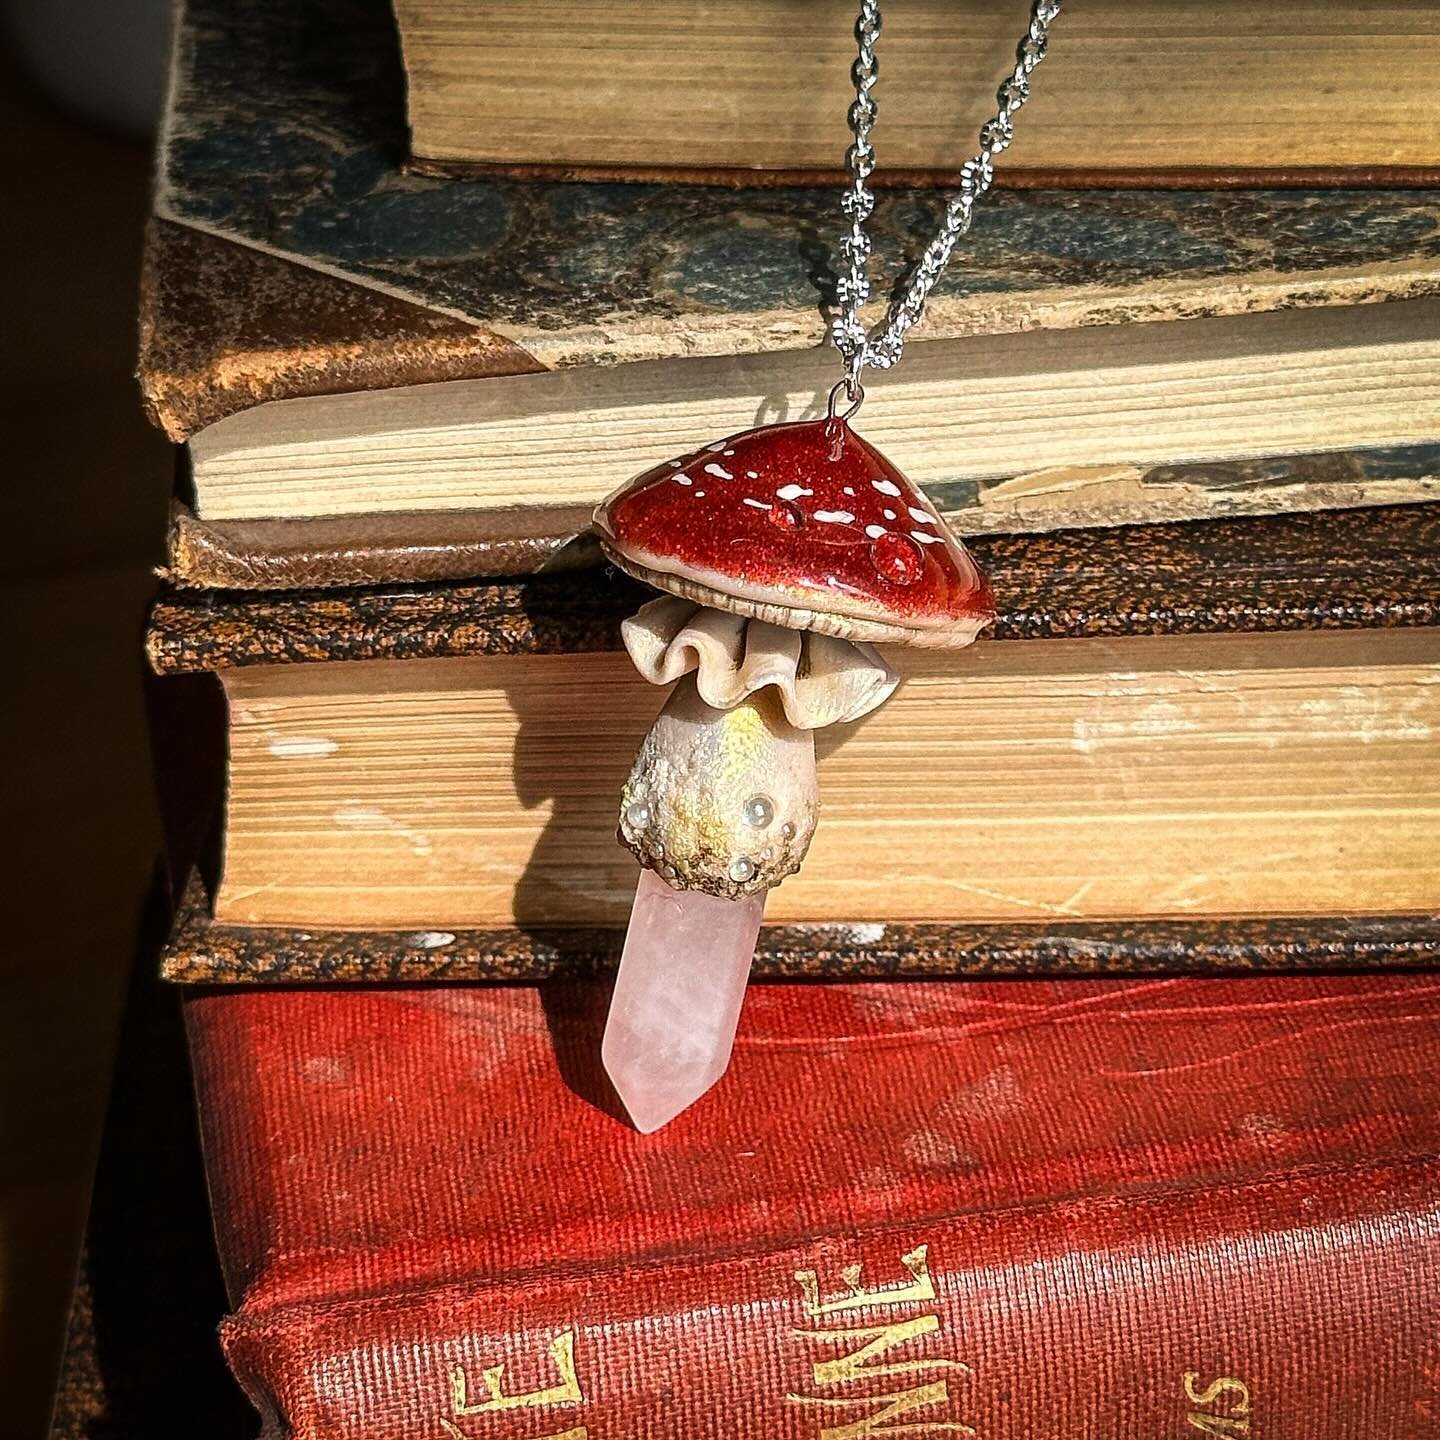 We have just stocked an exciting small business in #TheLostCauldron! Meet @v.hminiatures! 🍄 Victoria makes these STUNNING Toadstool necklaces by hand and they&rsquo;re all unique. We are utterly obsessed. We currently have a selection ready for thei